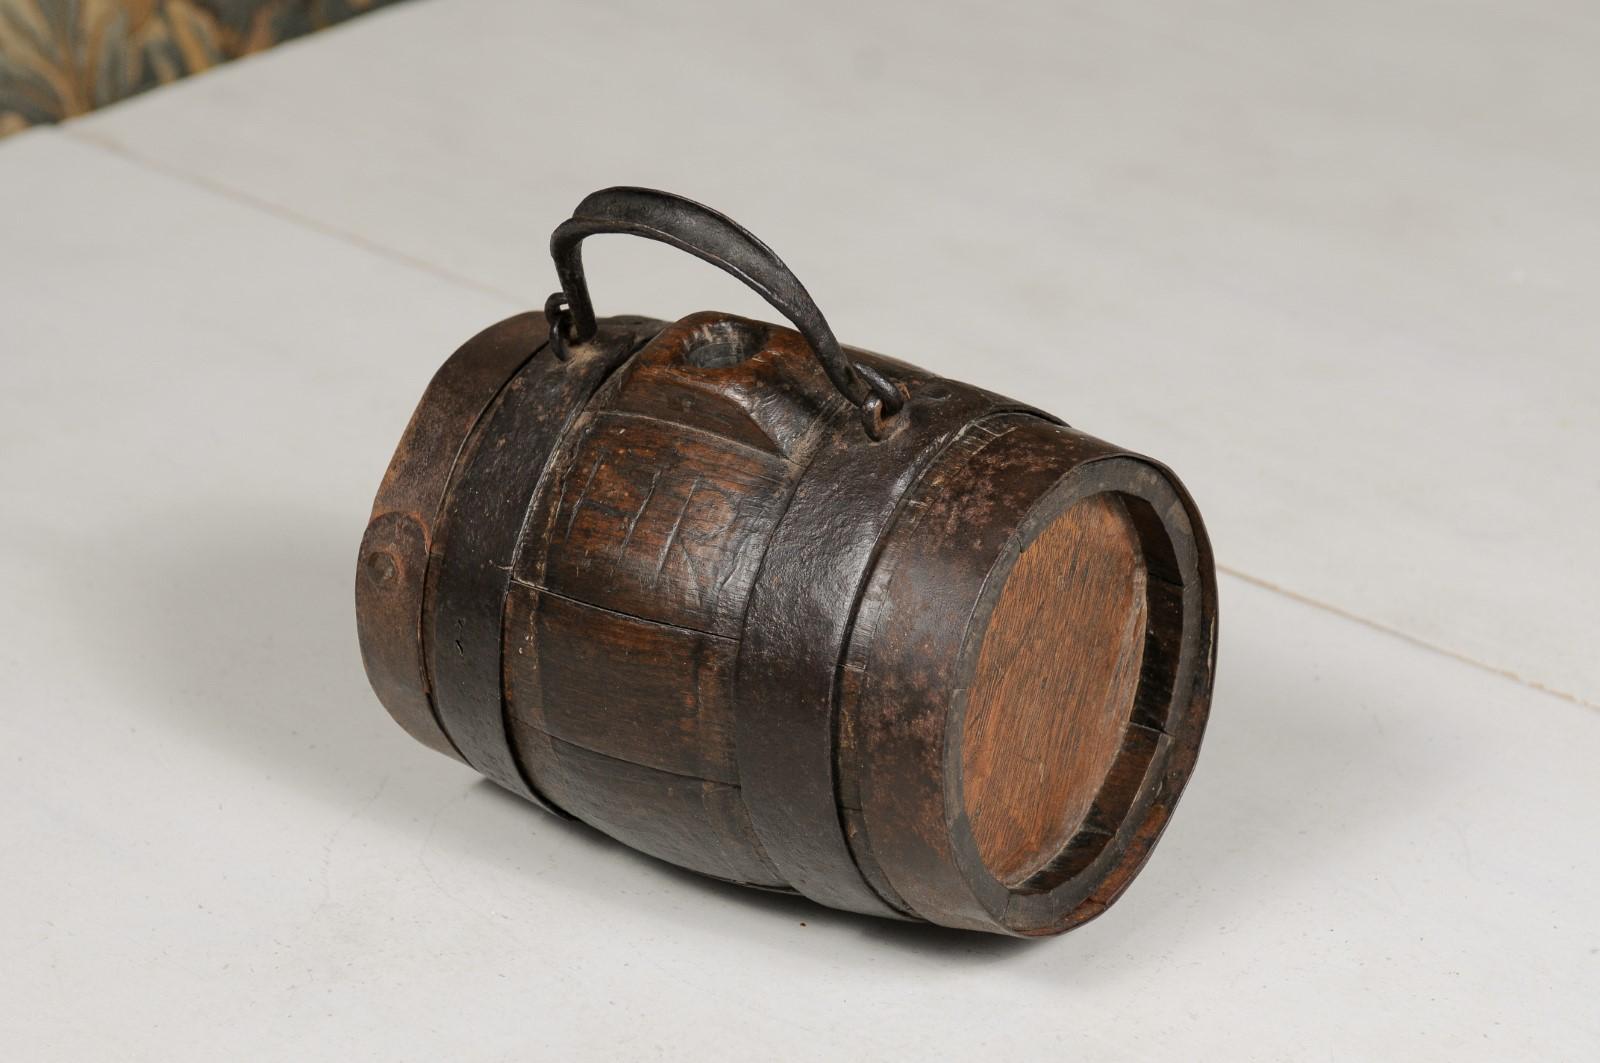 Rustic French 19th Century Petite Decorative Barrel with Iron Handle and Braces For Sale 5